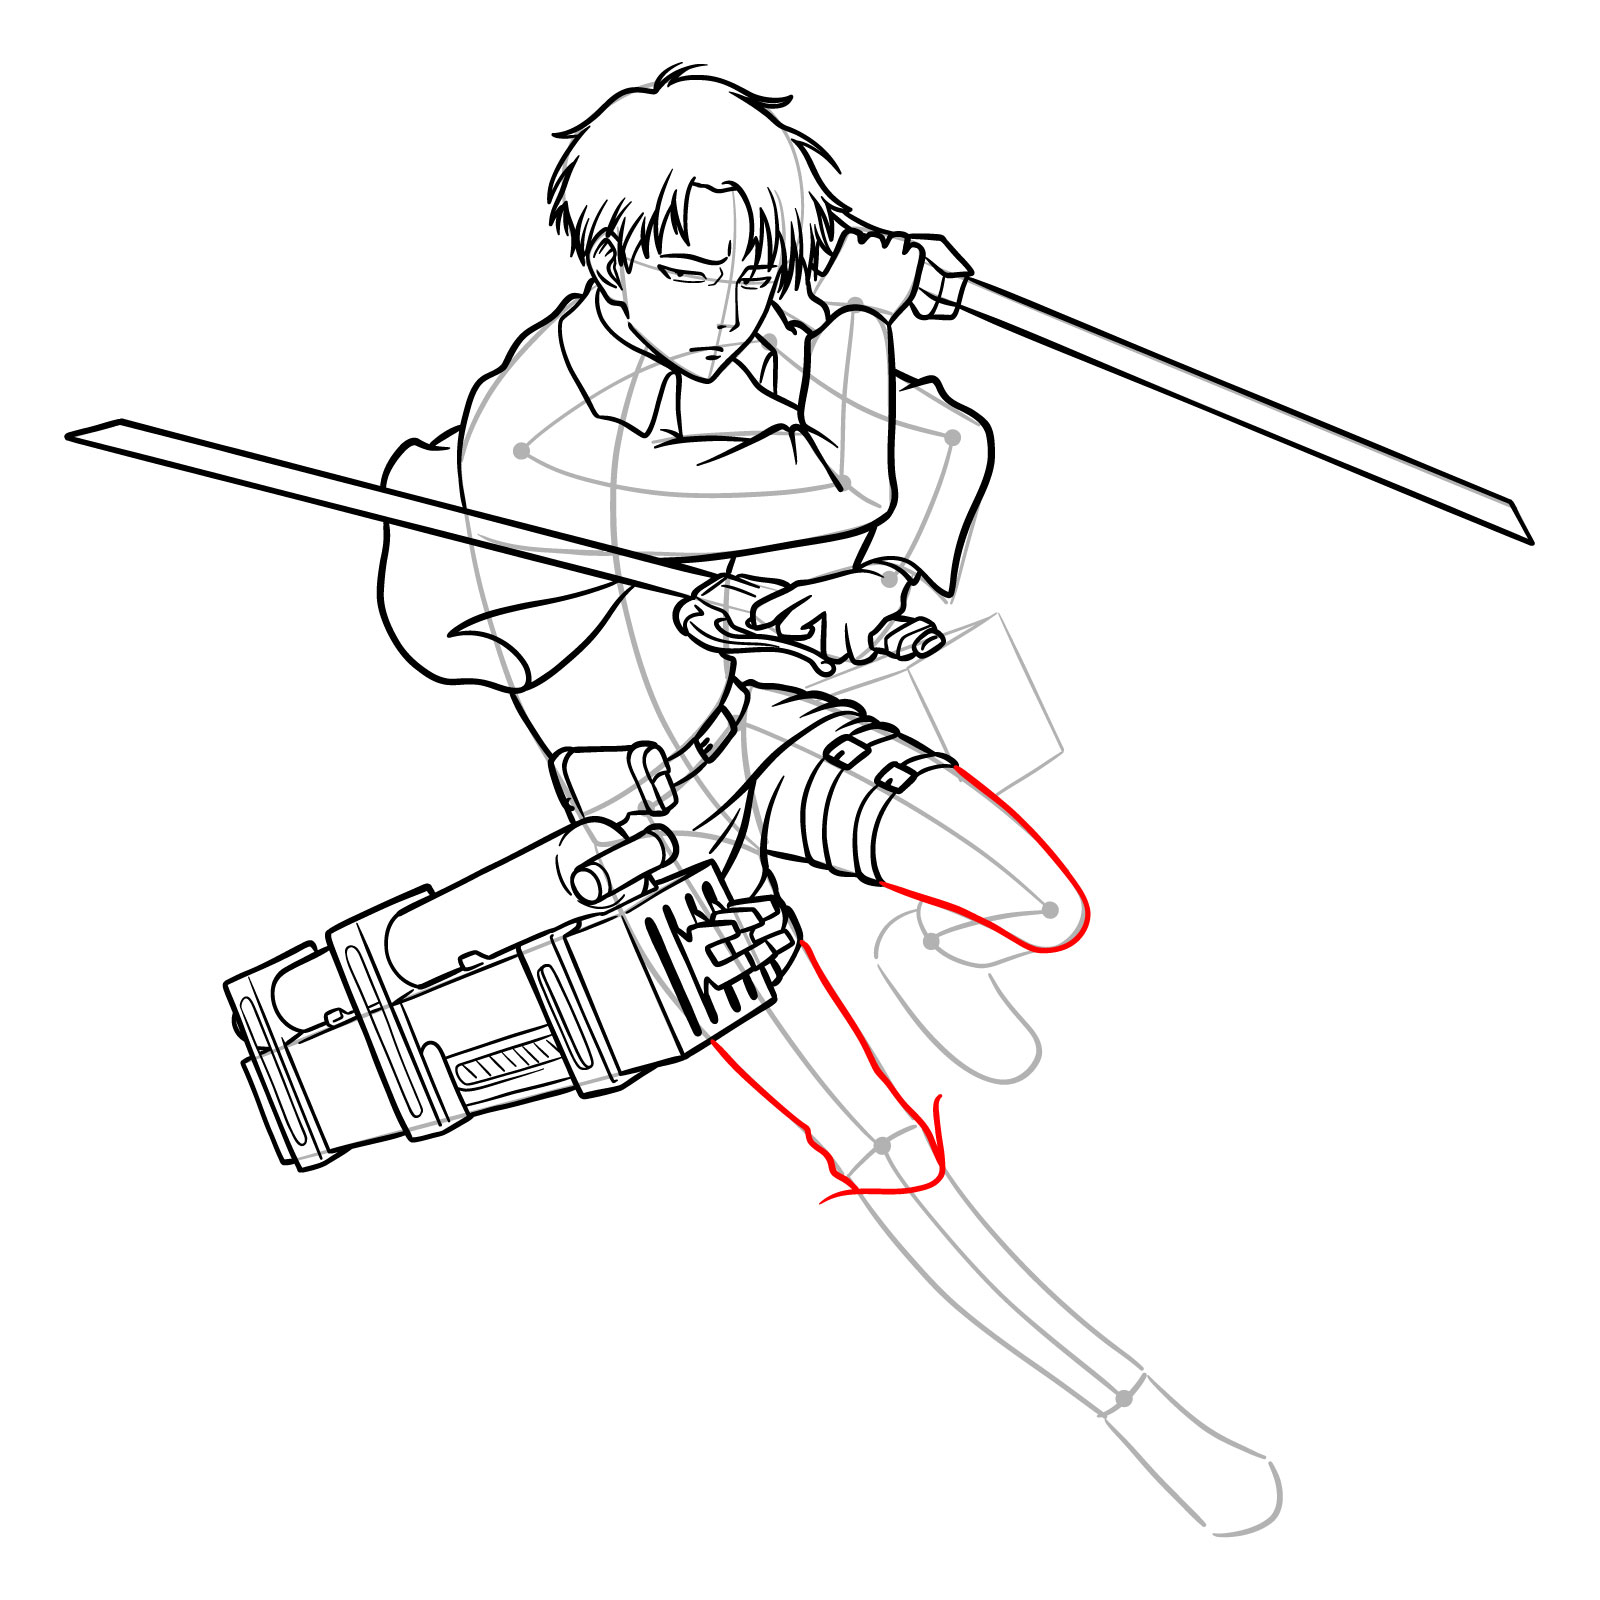 Step-by-step drawing of Captain Levi's legs and uniform details - step 28